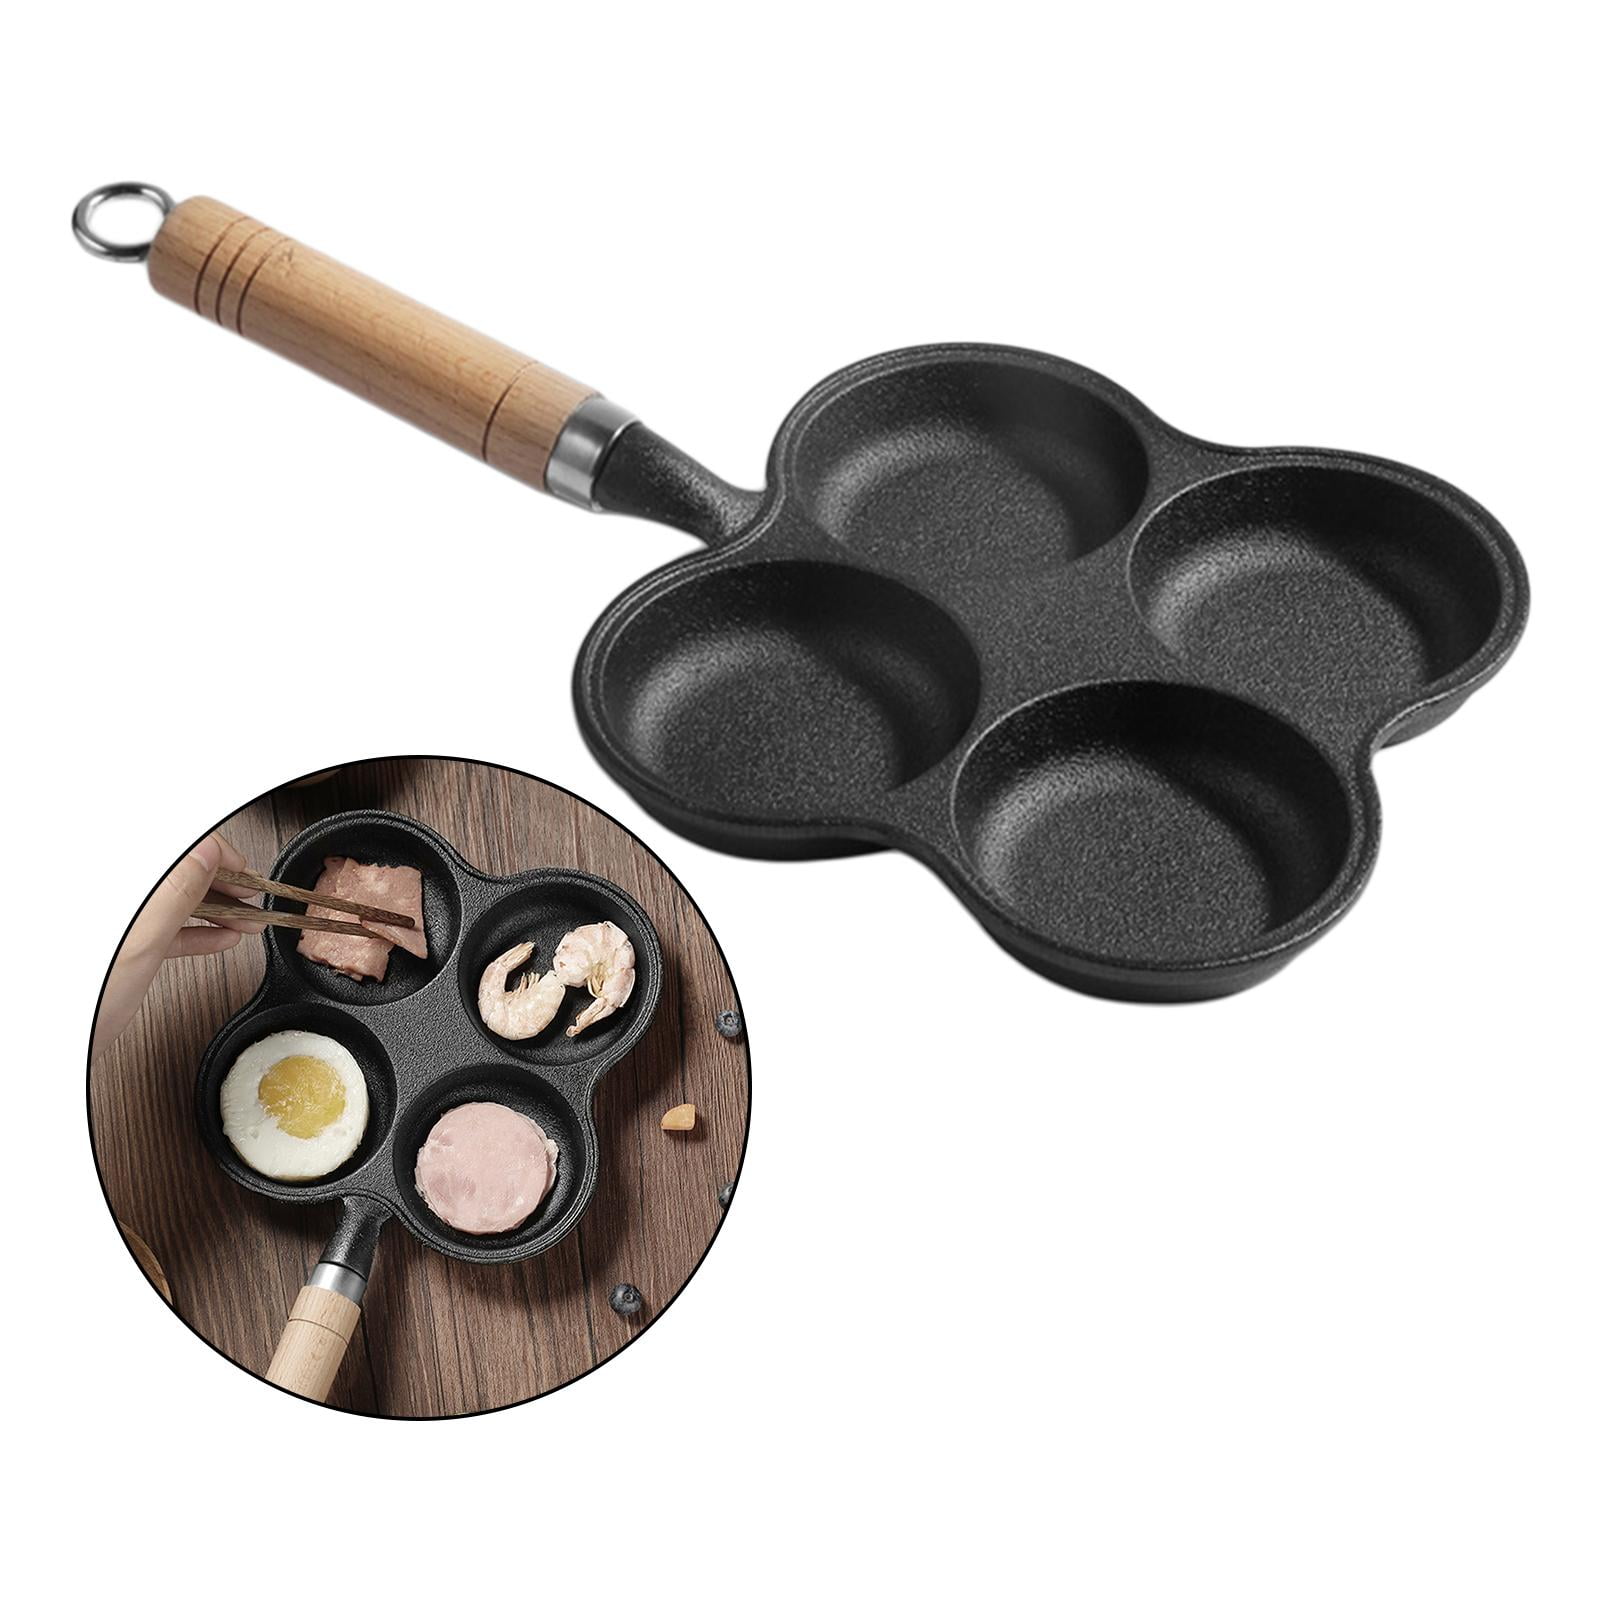 VANKUTL 4-Cup Nonstick Egg Frying Pan, Egg Pan for Breakfast, Egg Burgers,  Vegetable Patties, Pancakes, Nonstick Cookware Suitable for Gas Stoves